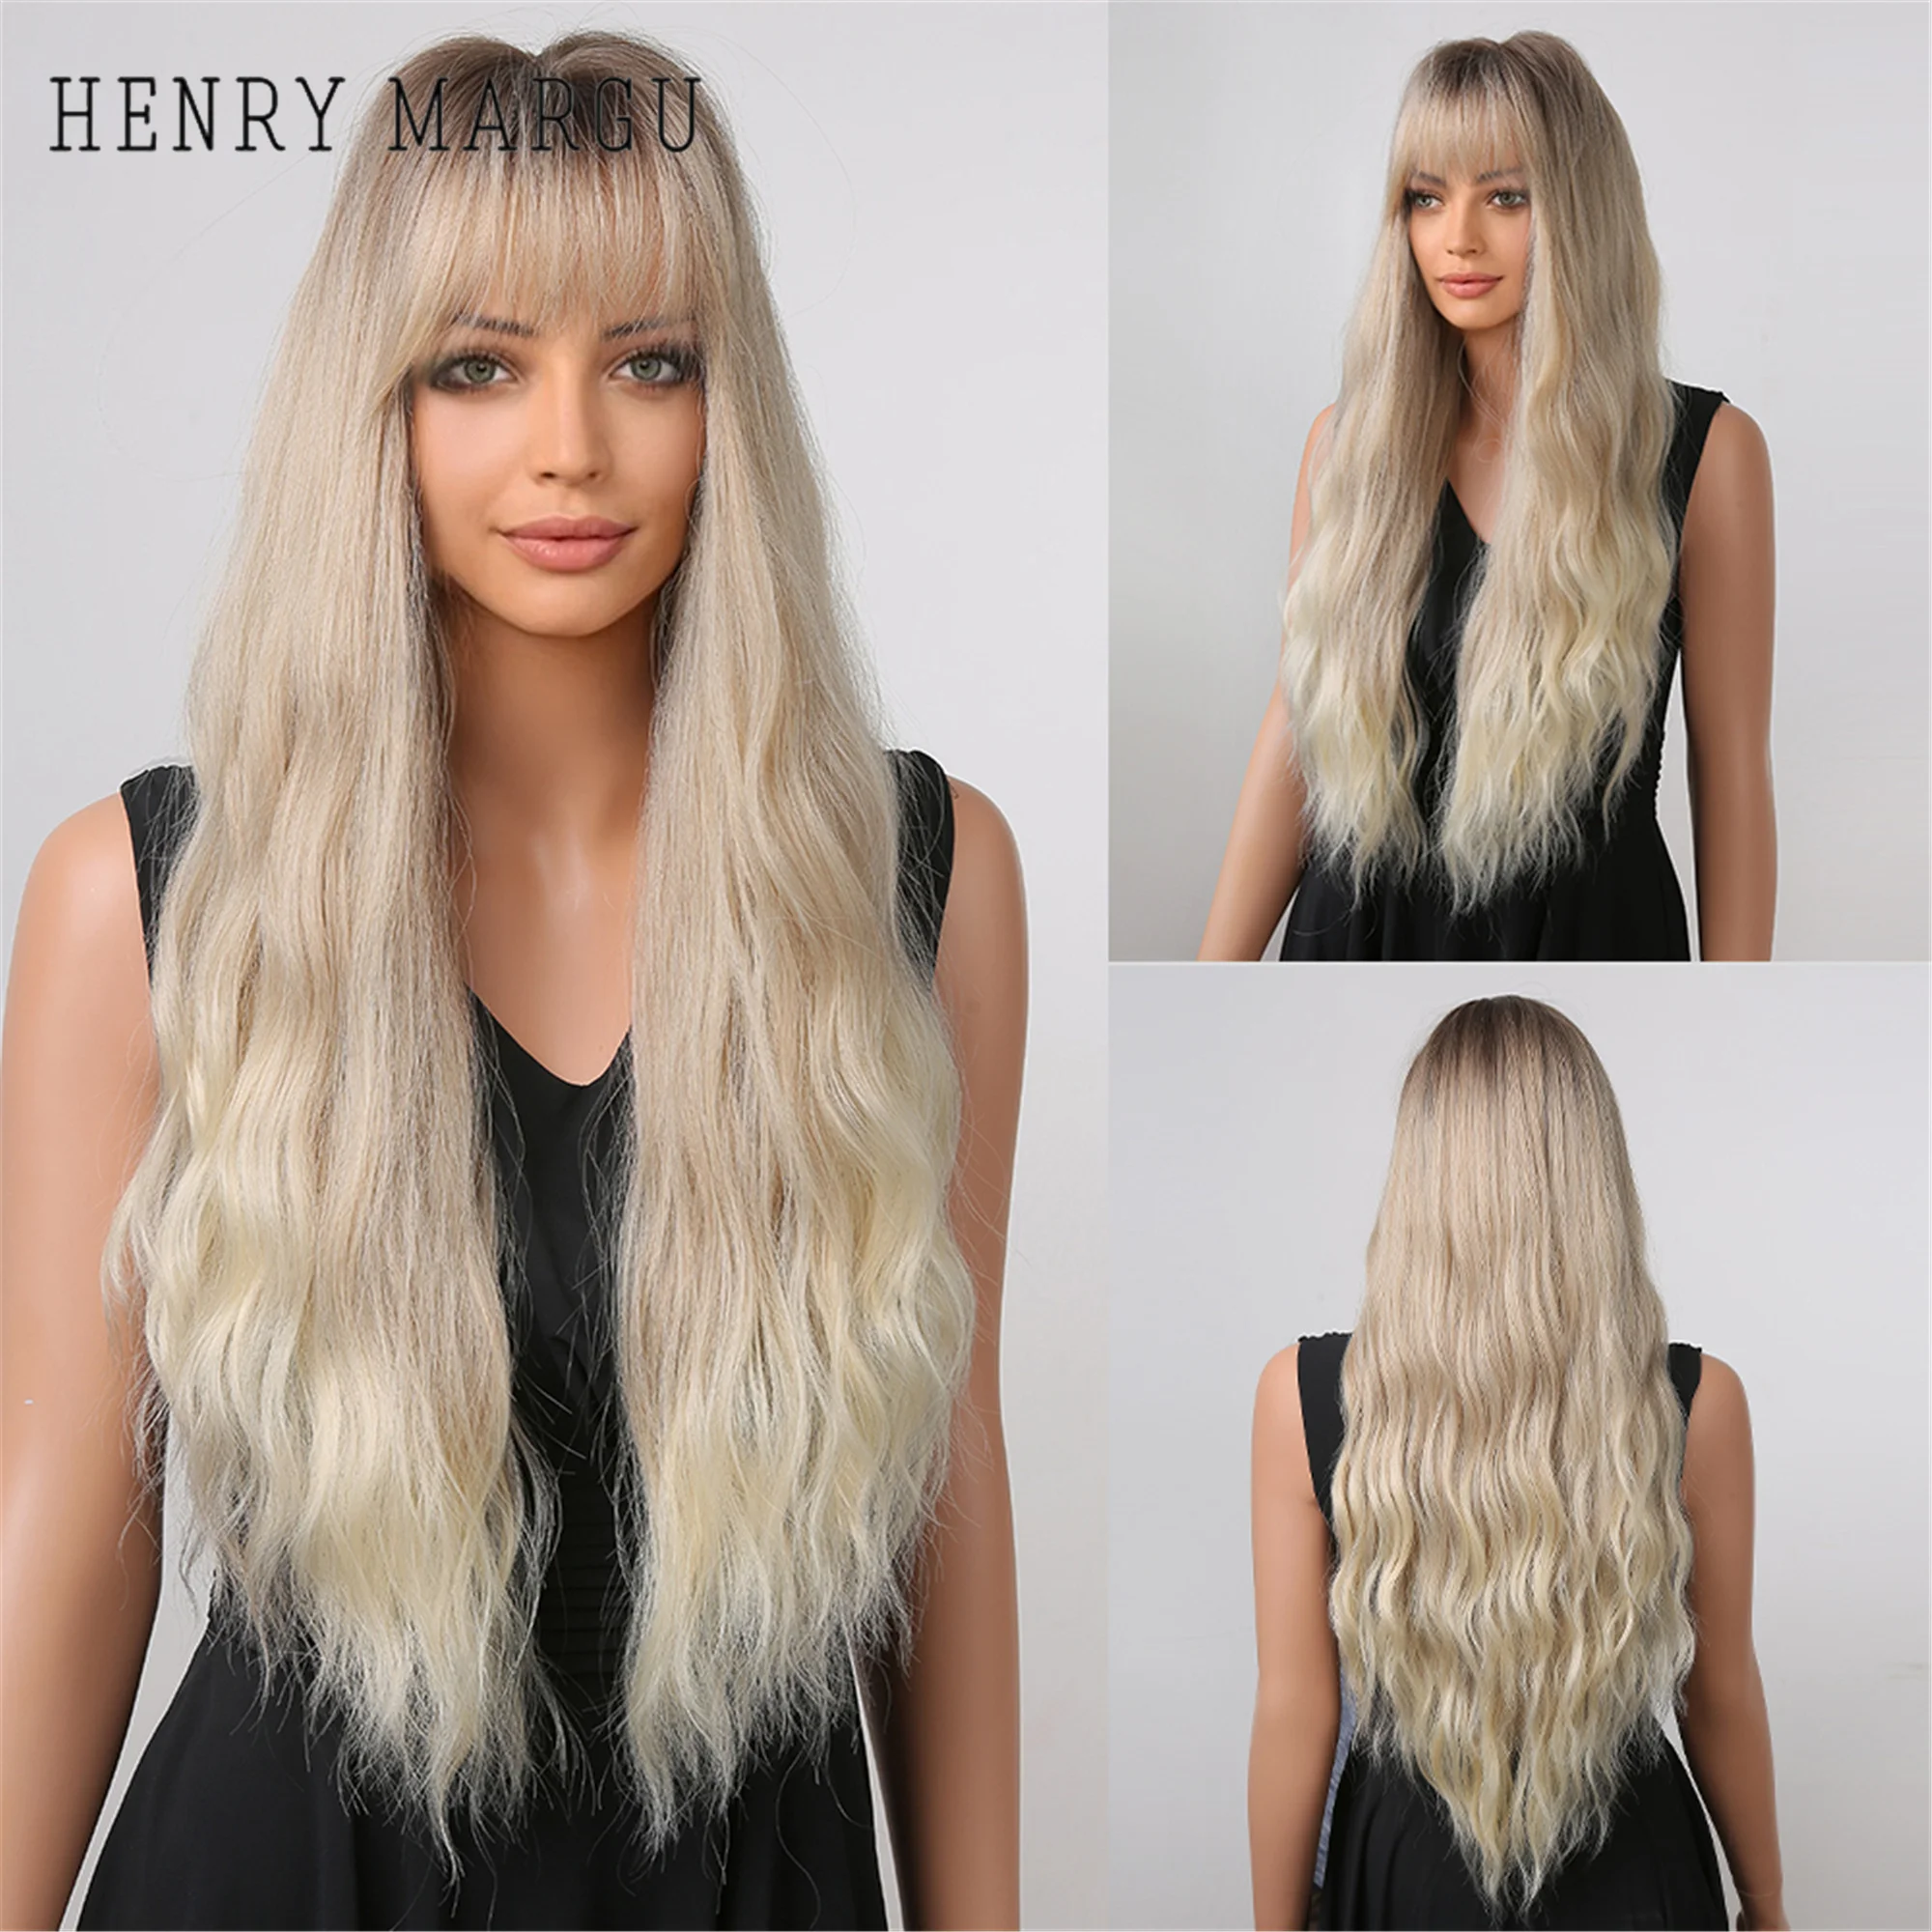 

HENRY MARGU Long Ombre Ash Blonde Wig with Bangs Synthetic Water Wavy Wig for Women Dark Root Heat Resistant Cosplay Lolita Hair